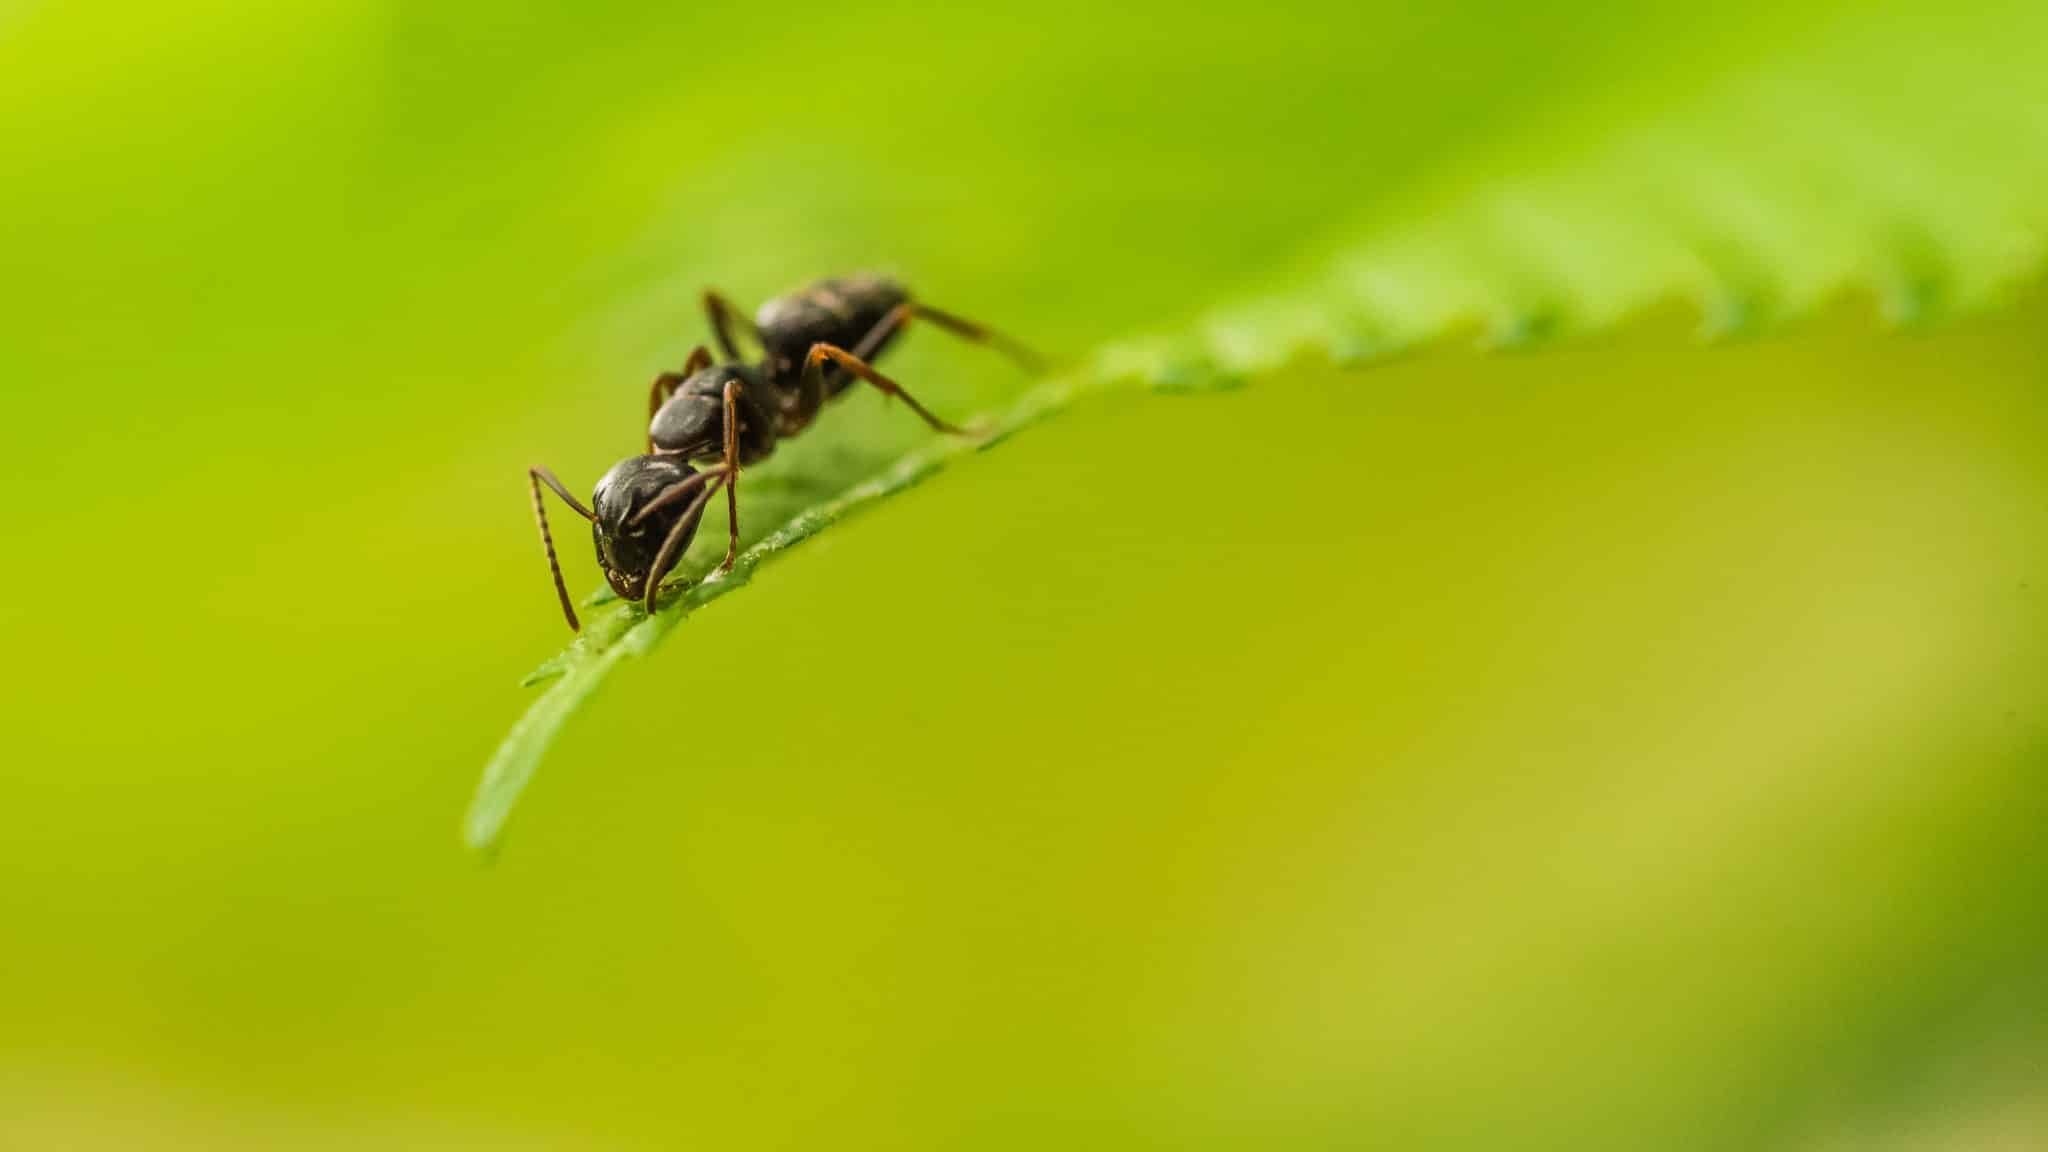 Ants, insects that know how to heal themselves